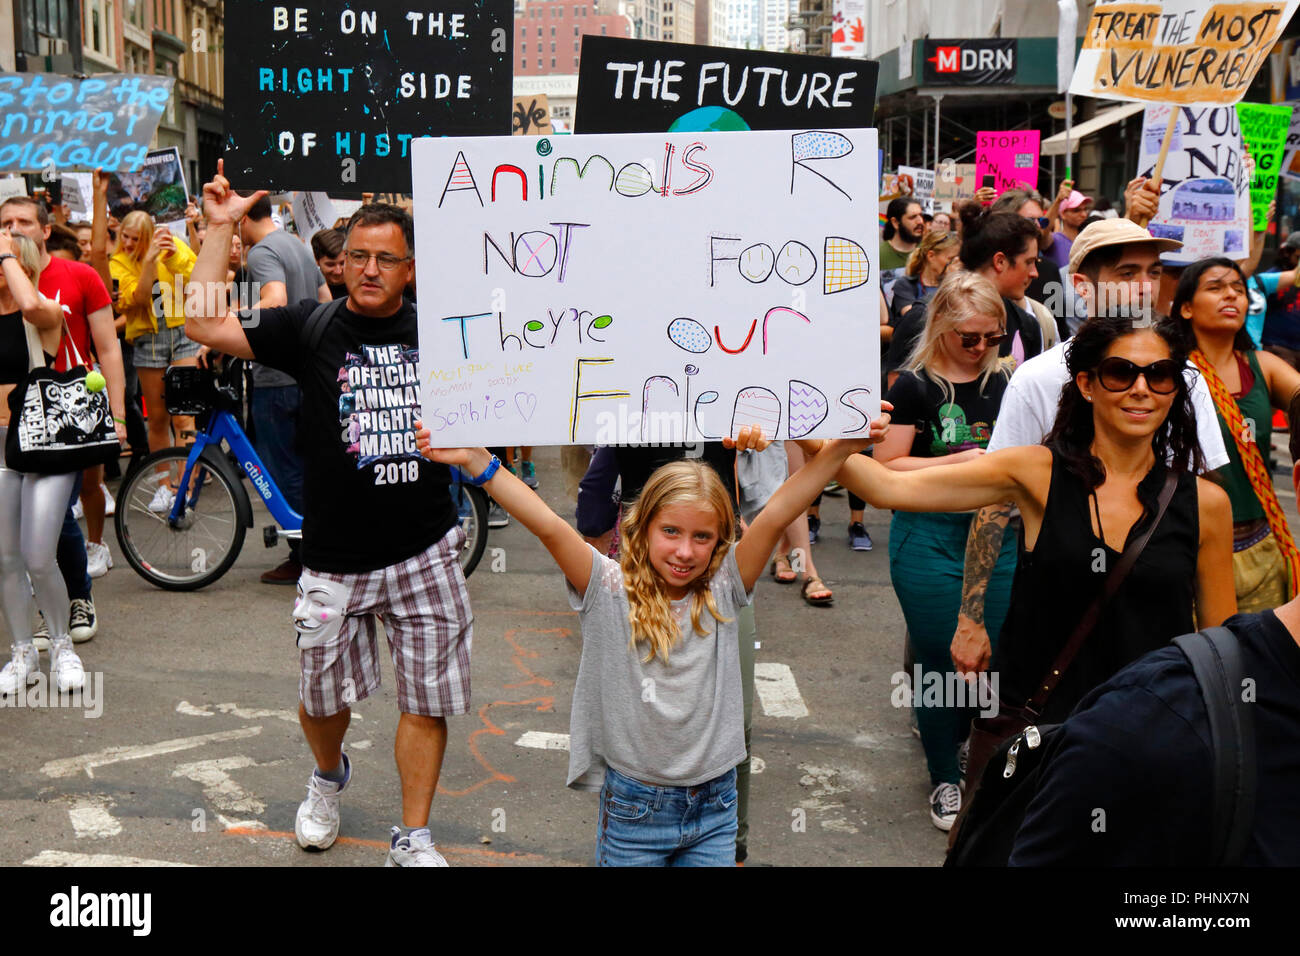 New York, NY, USA. 1st September, 2018. A young activist holds a sign supporting animal rights at the Official Animal Rights March NYC. Stock Photo